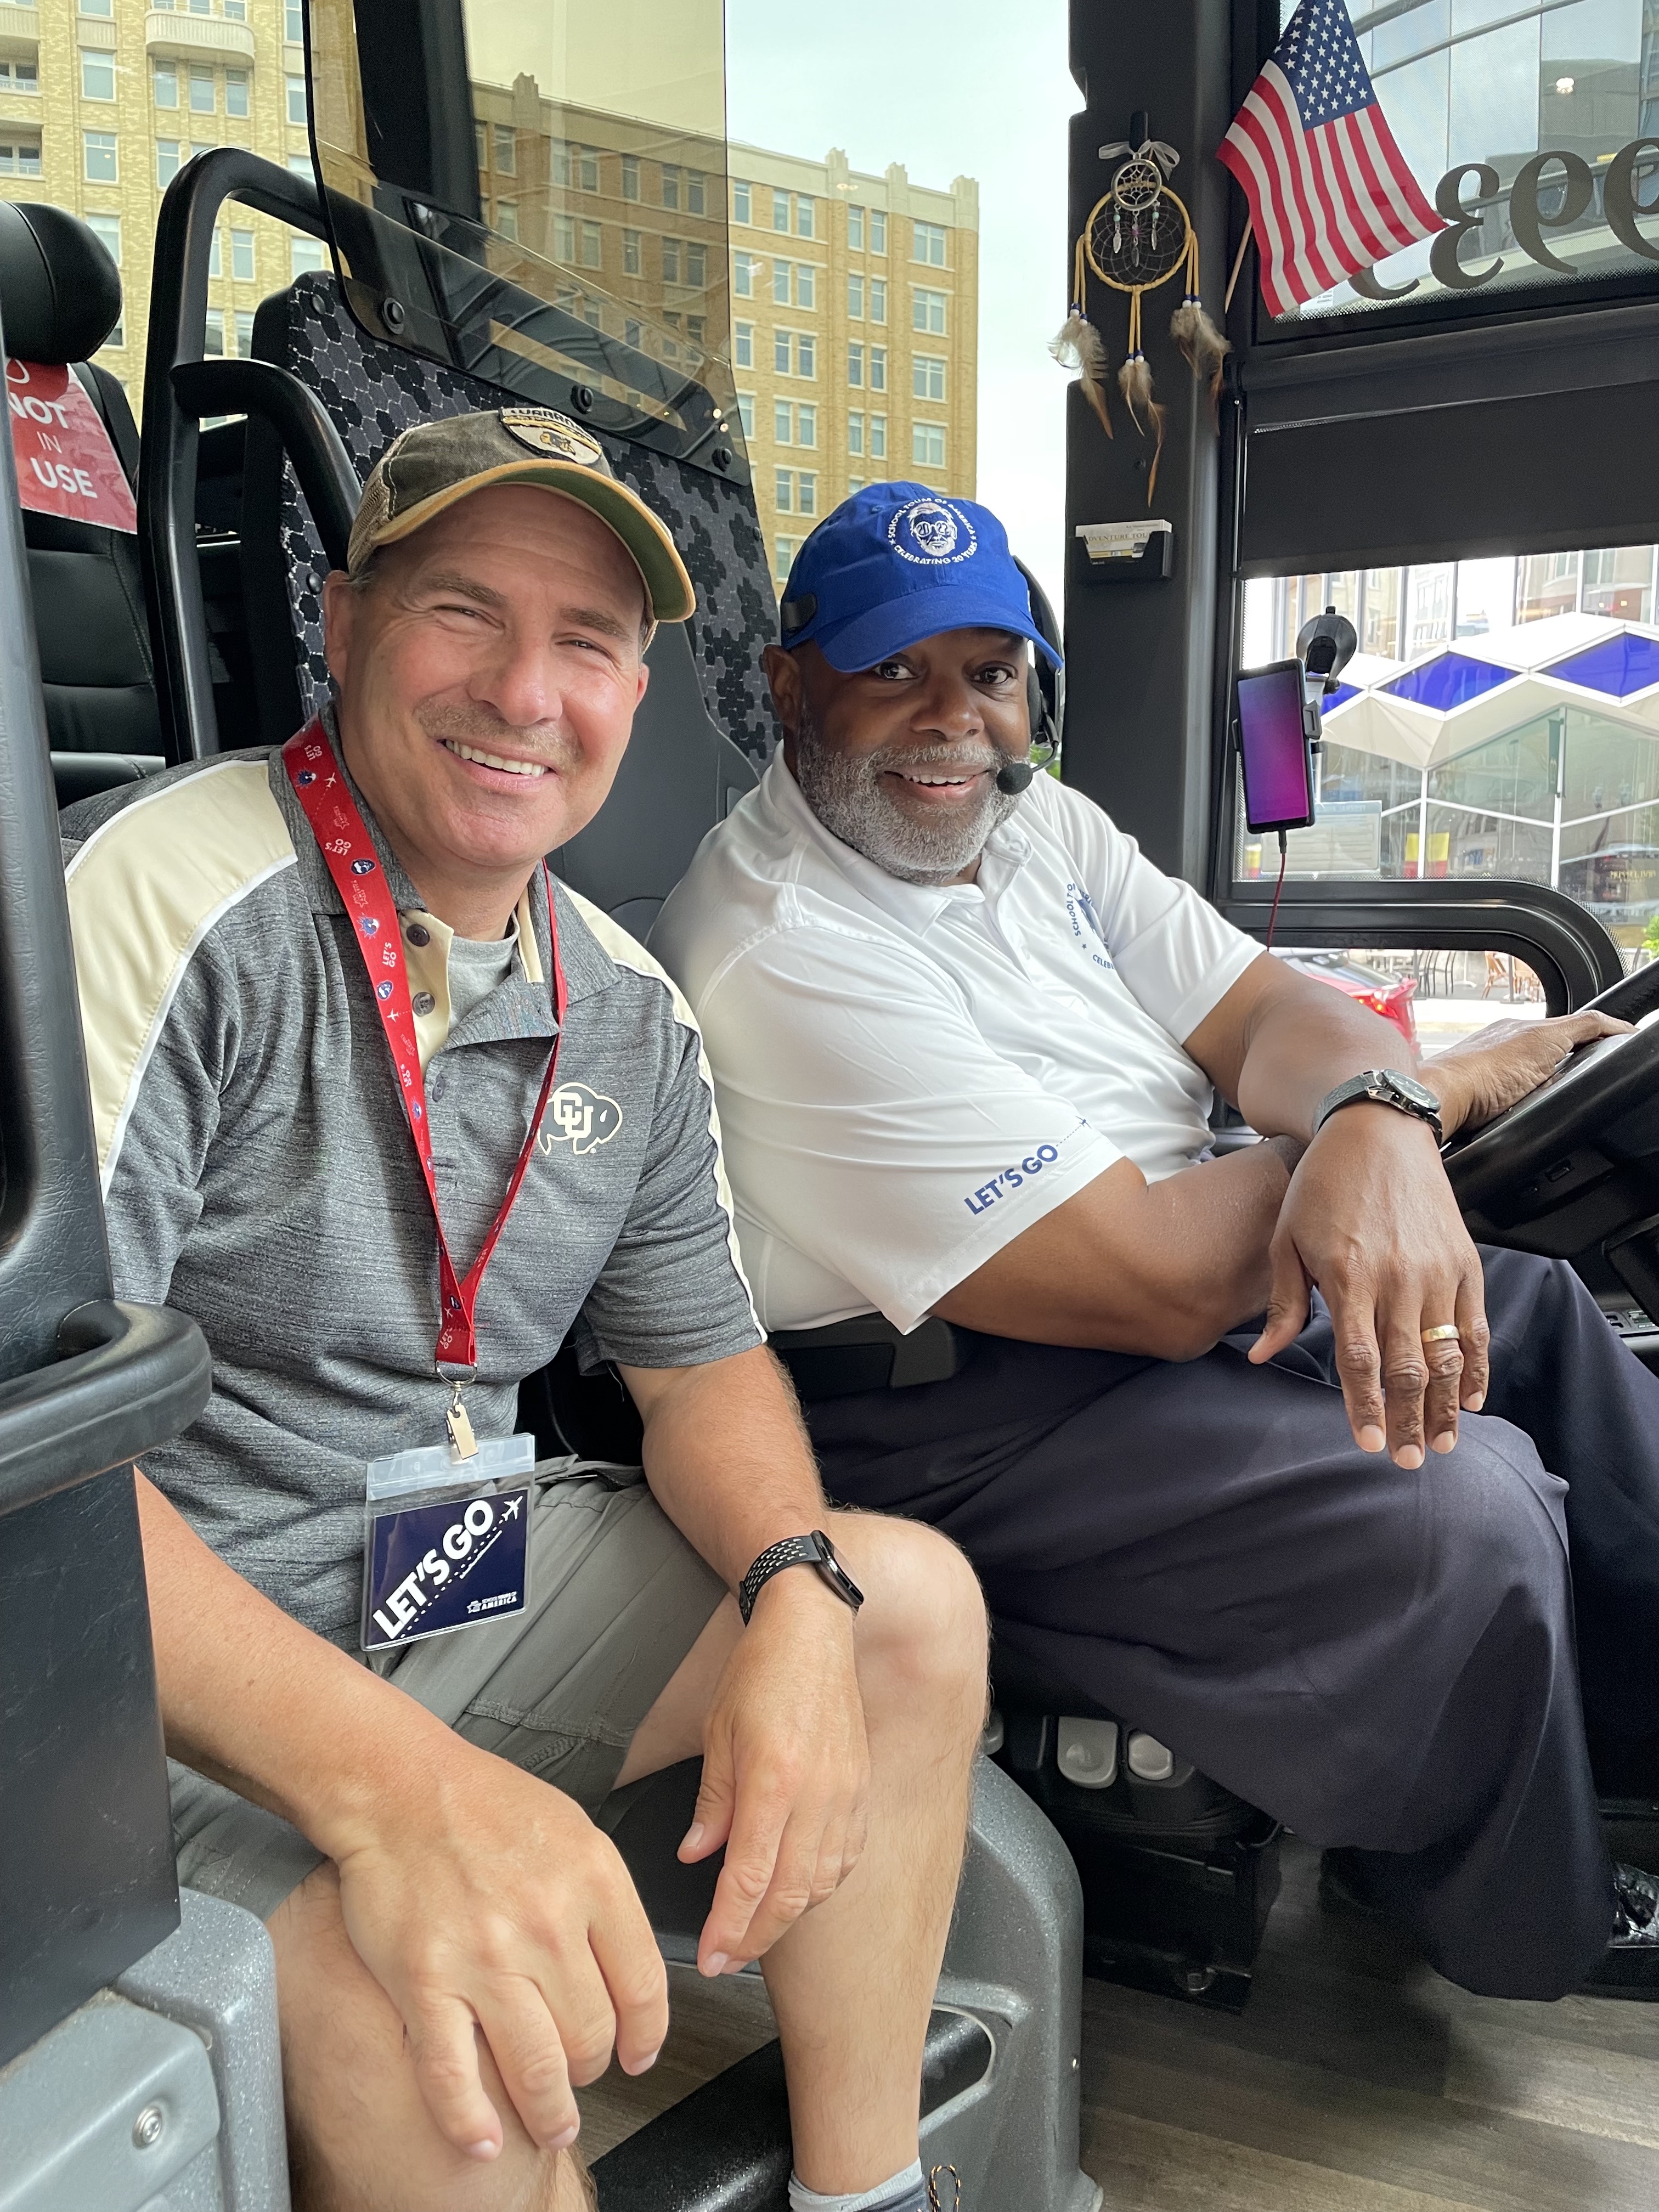 A teacher sits smiling with their local Washington, DC bus driver about to tour.